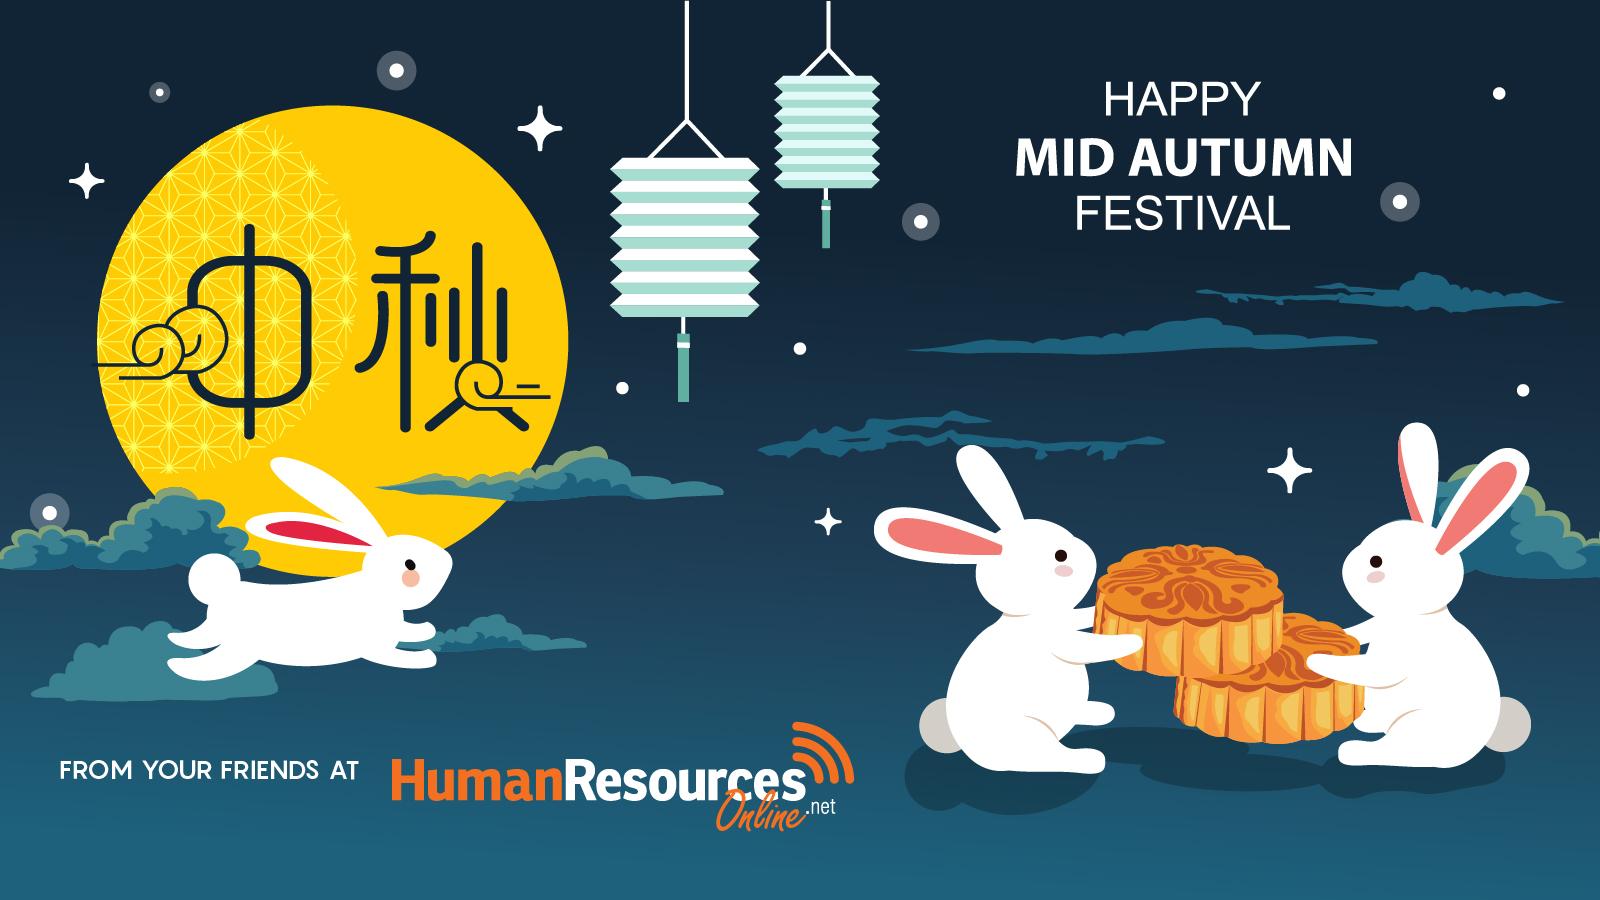 Happy Mid Autumn Festival To All: Top Five Ways To Celebrate It